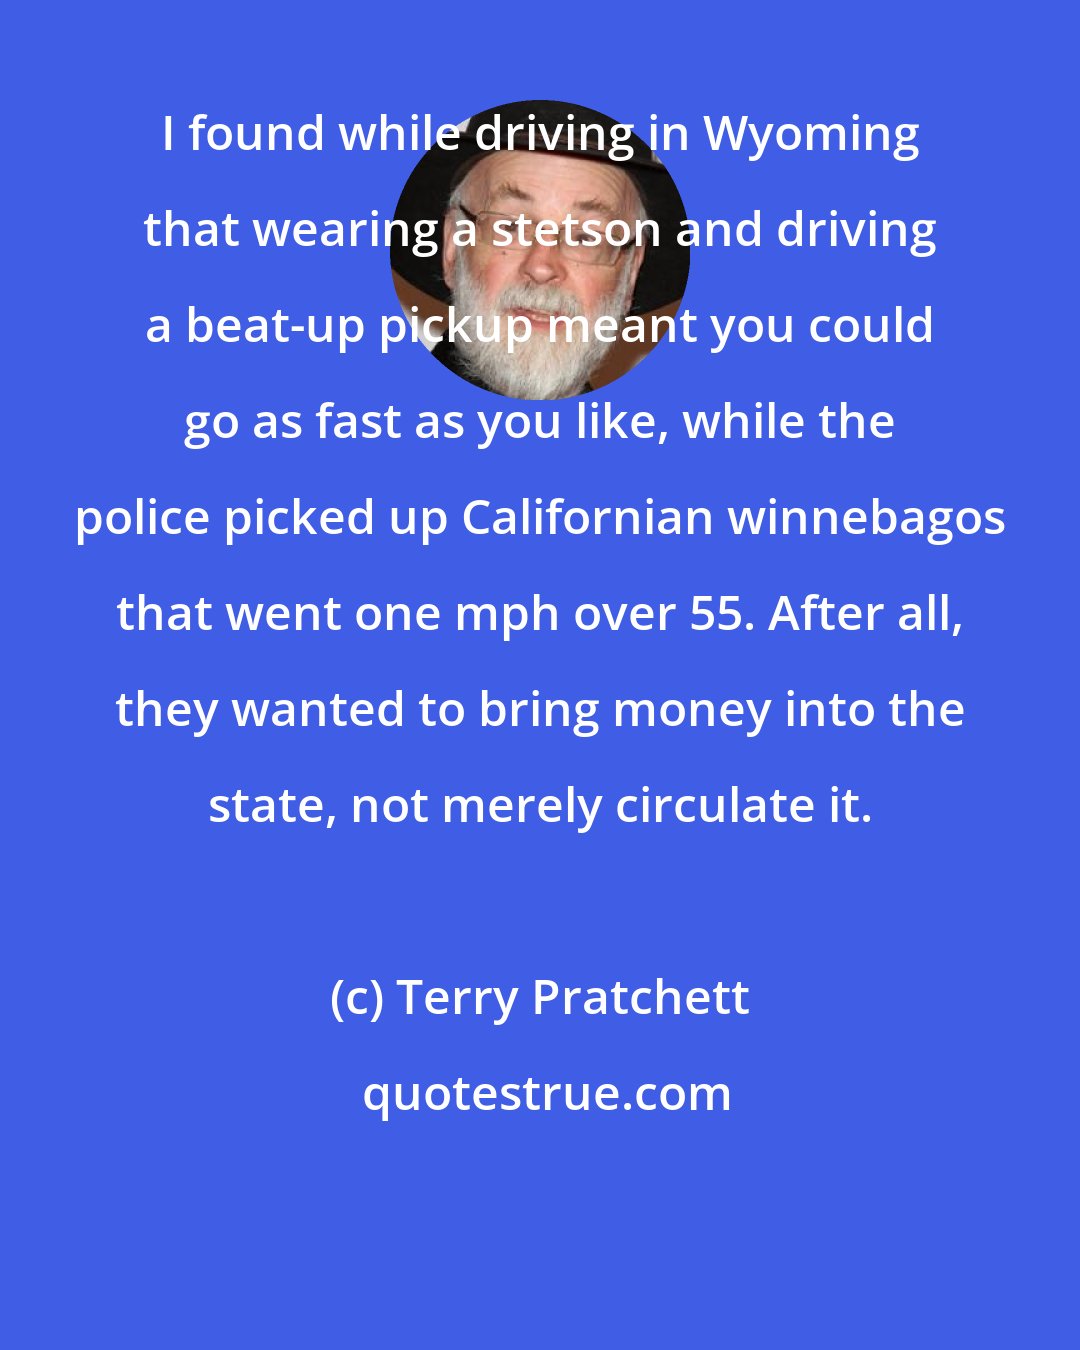 Terry Pratchett: I found while driving in Wyoming that wearing a stetson and driving a beat-up pickup meant you could go as fast as you like, while the police picked up Californian winnebagos that went one mph over 55. After all, they wanted to bring money into the state, not merely circulate it.